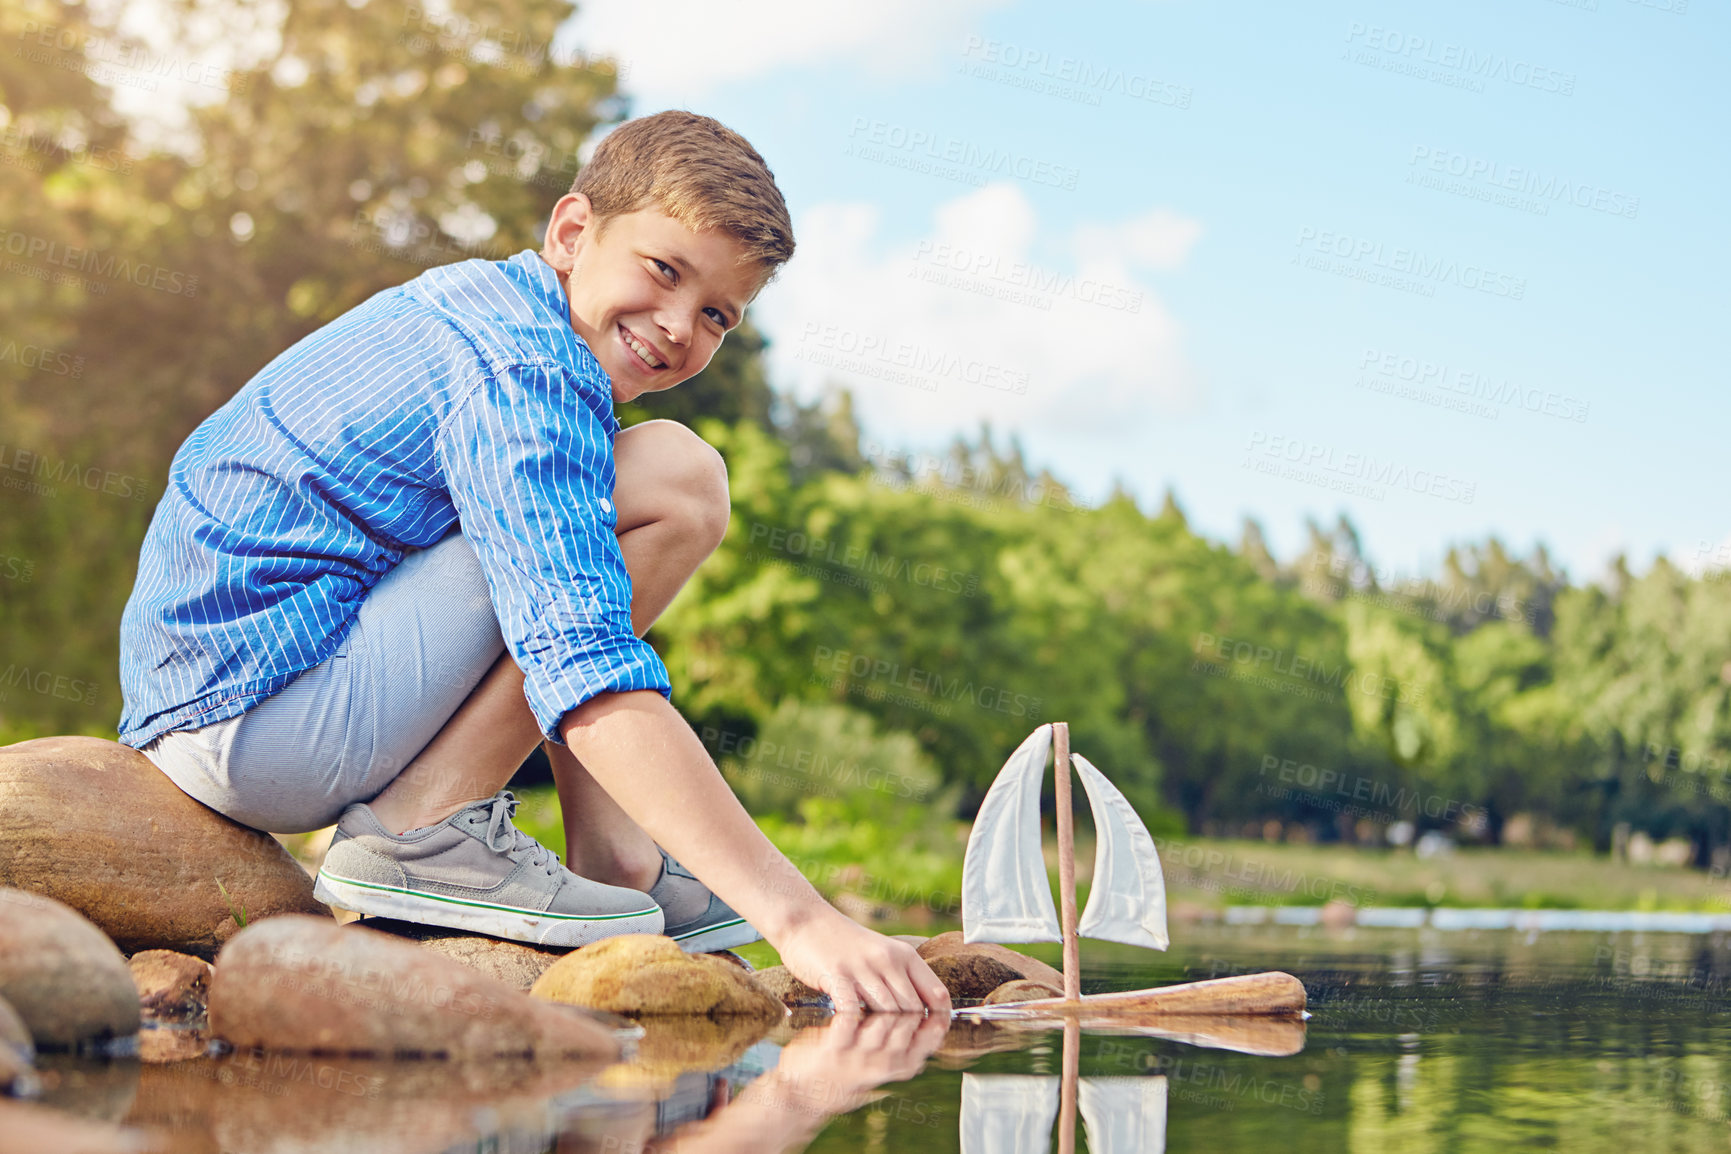 Buy stock photo Shot of a young boy playing with a toy boat by the water